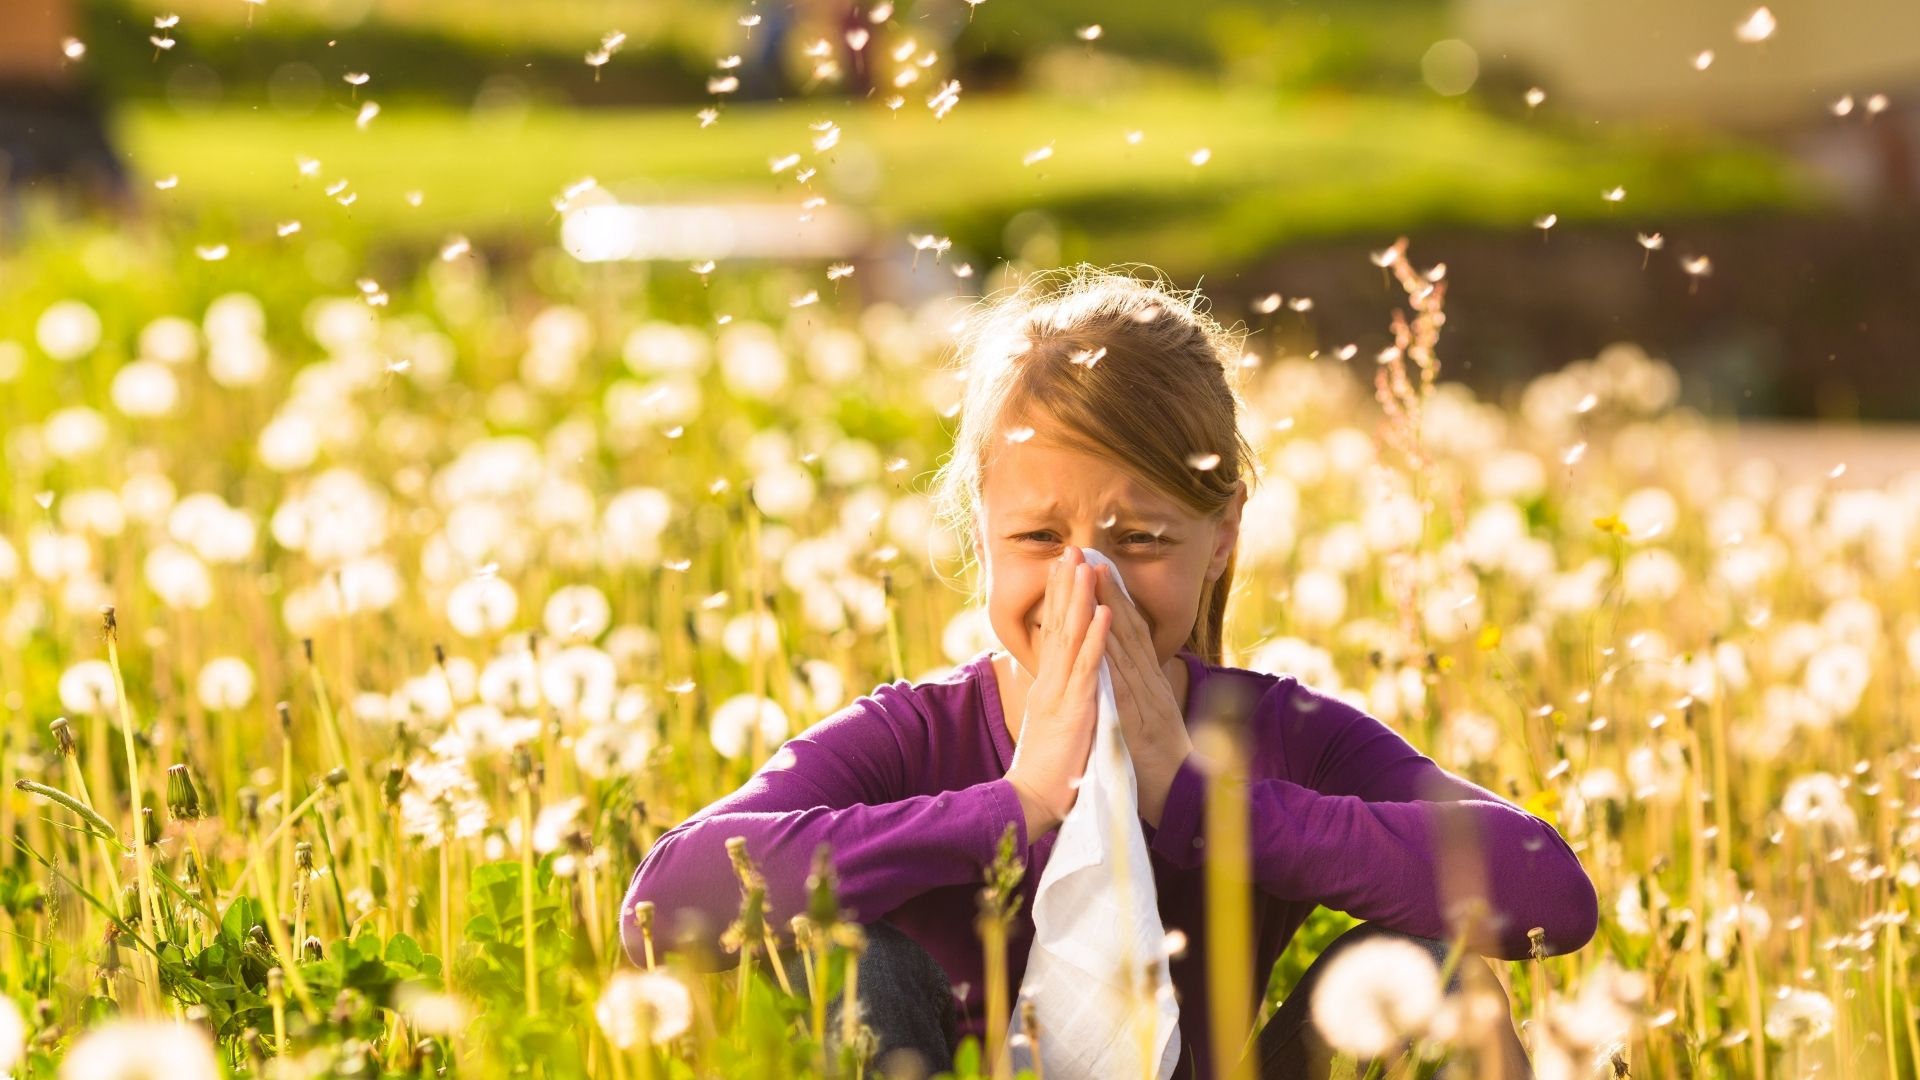 Do different types of hay fever present at different times of the year?